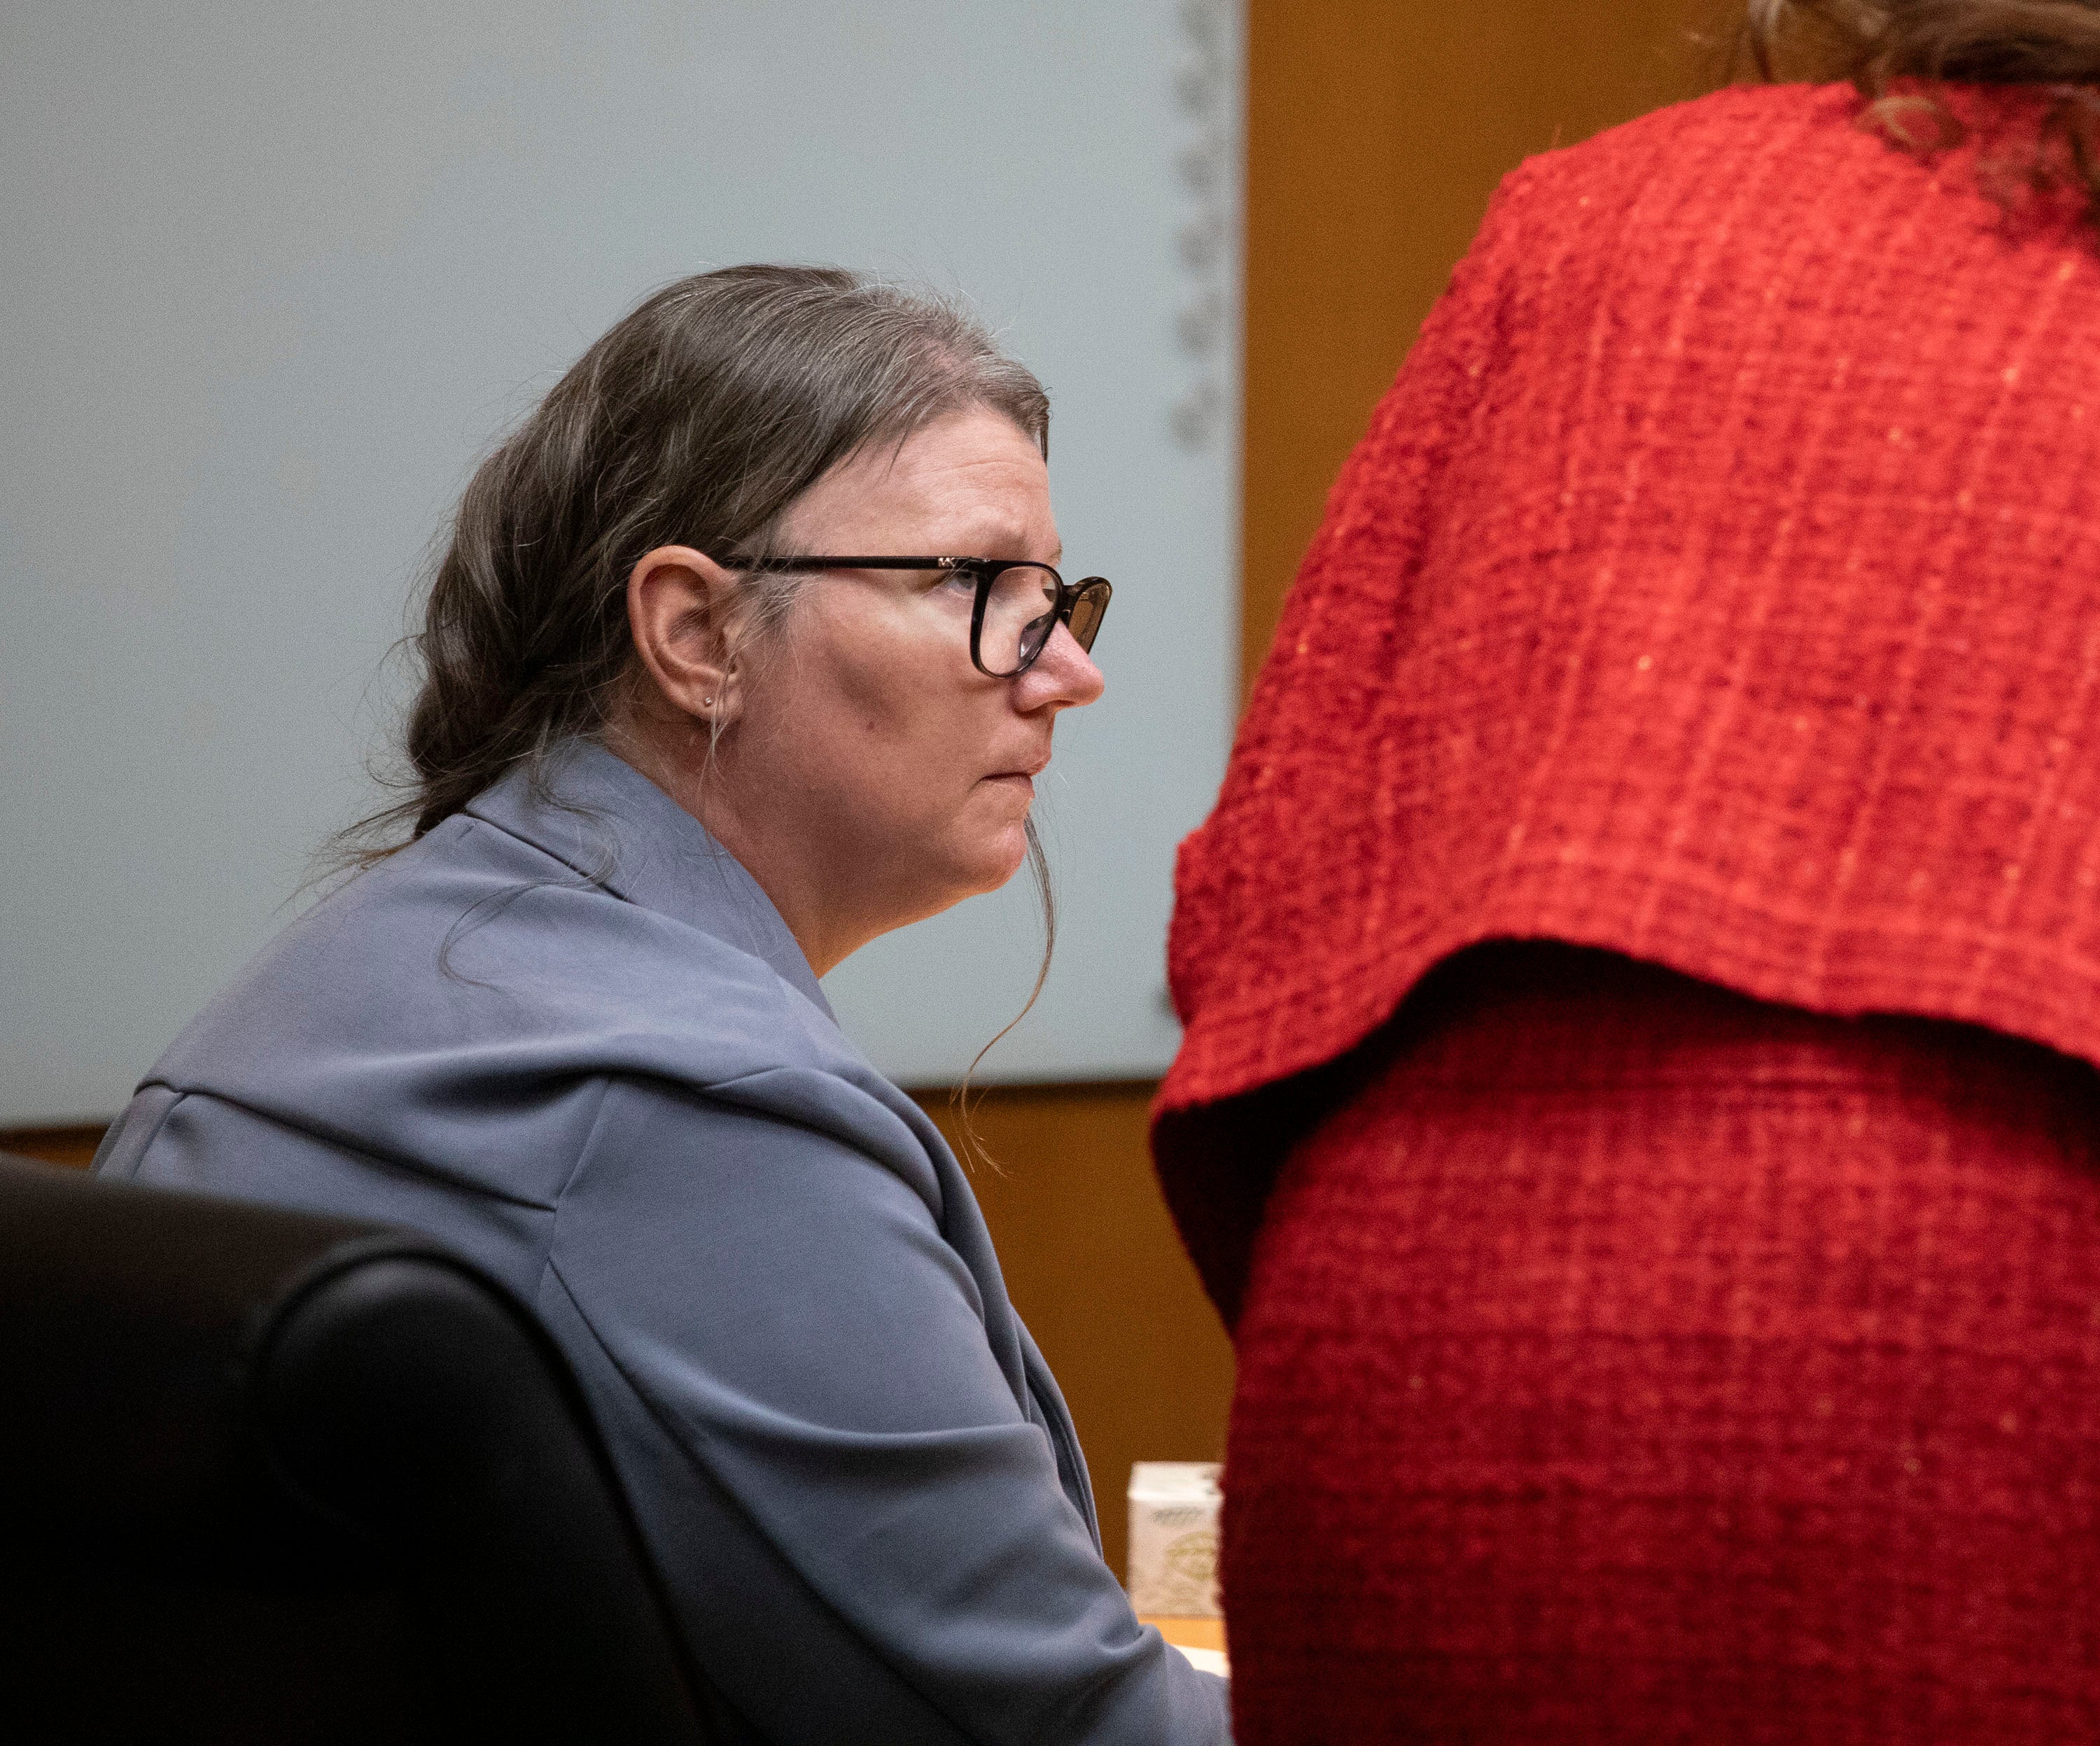 Jennifer Crumbley listens to her defense attorney on 31 January